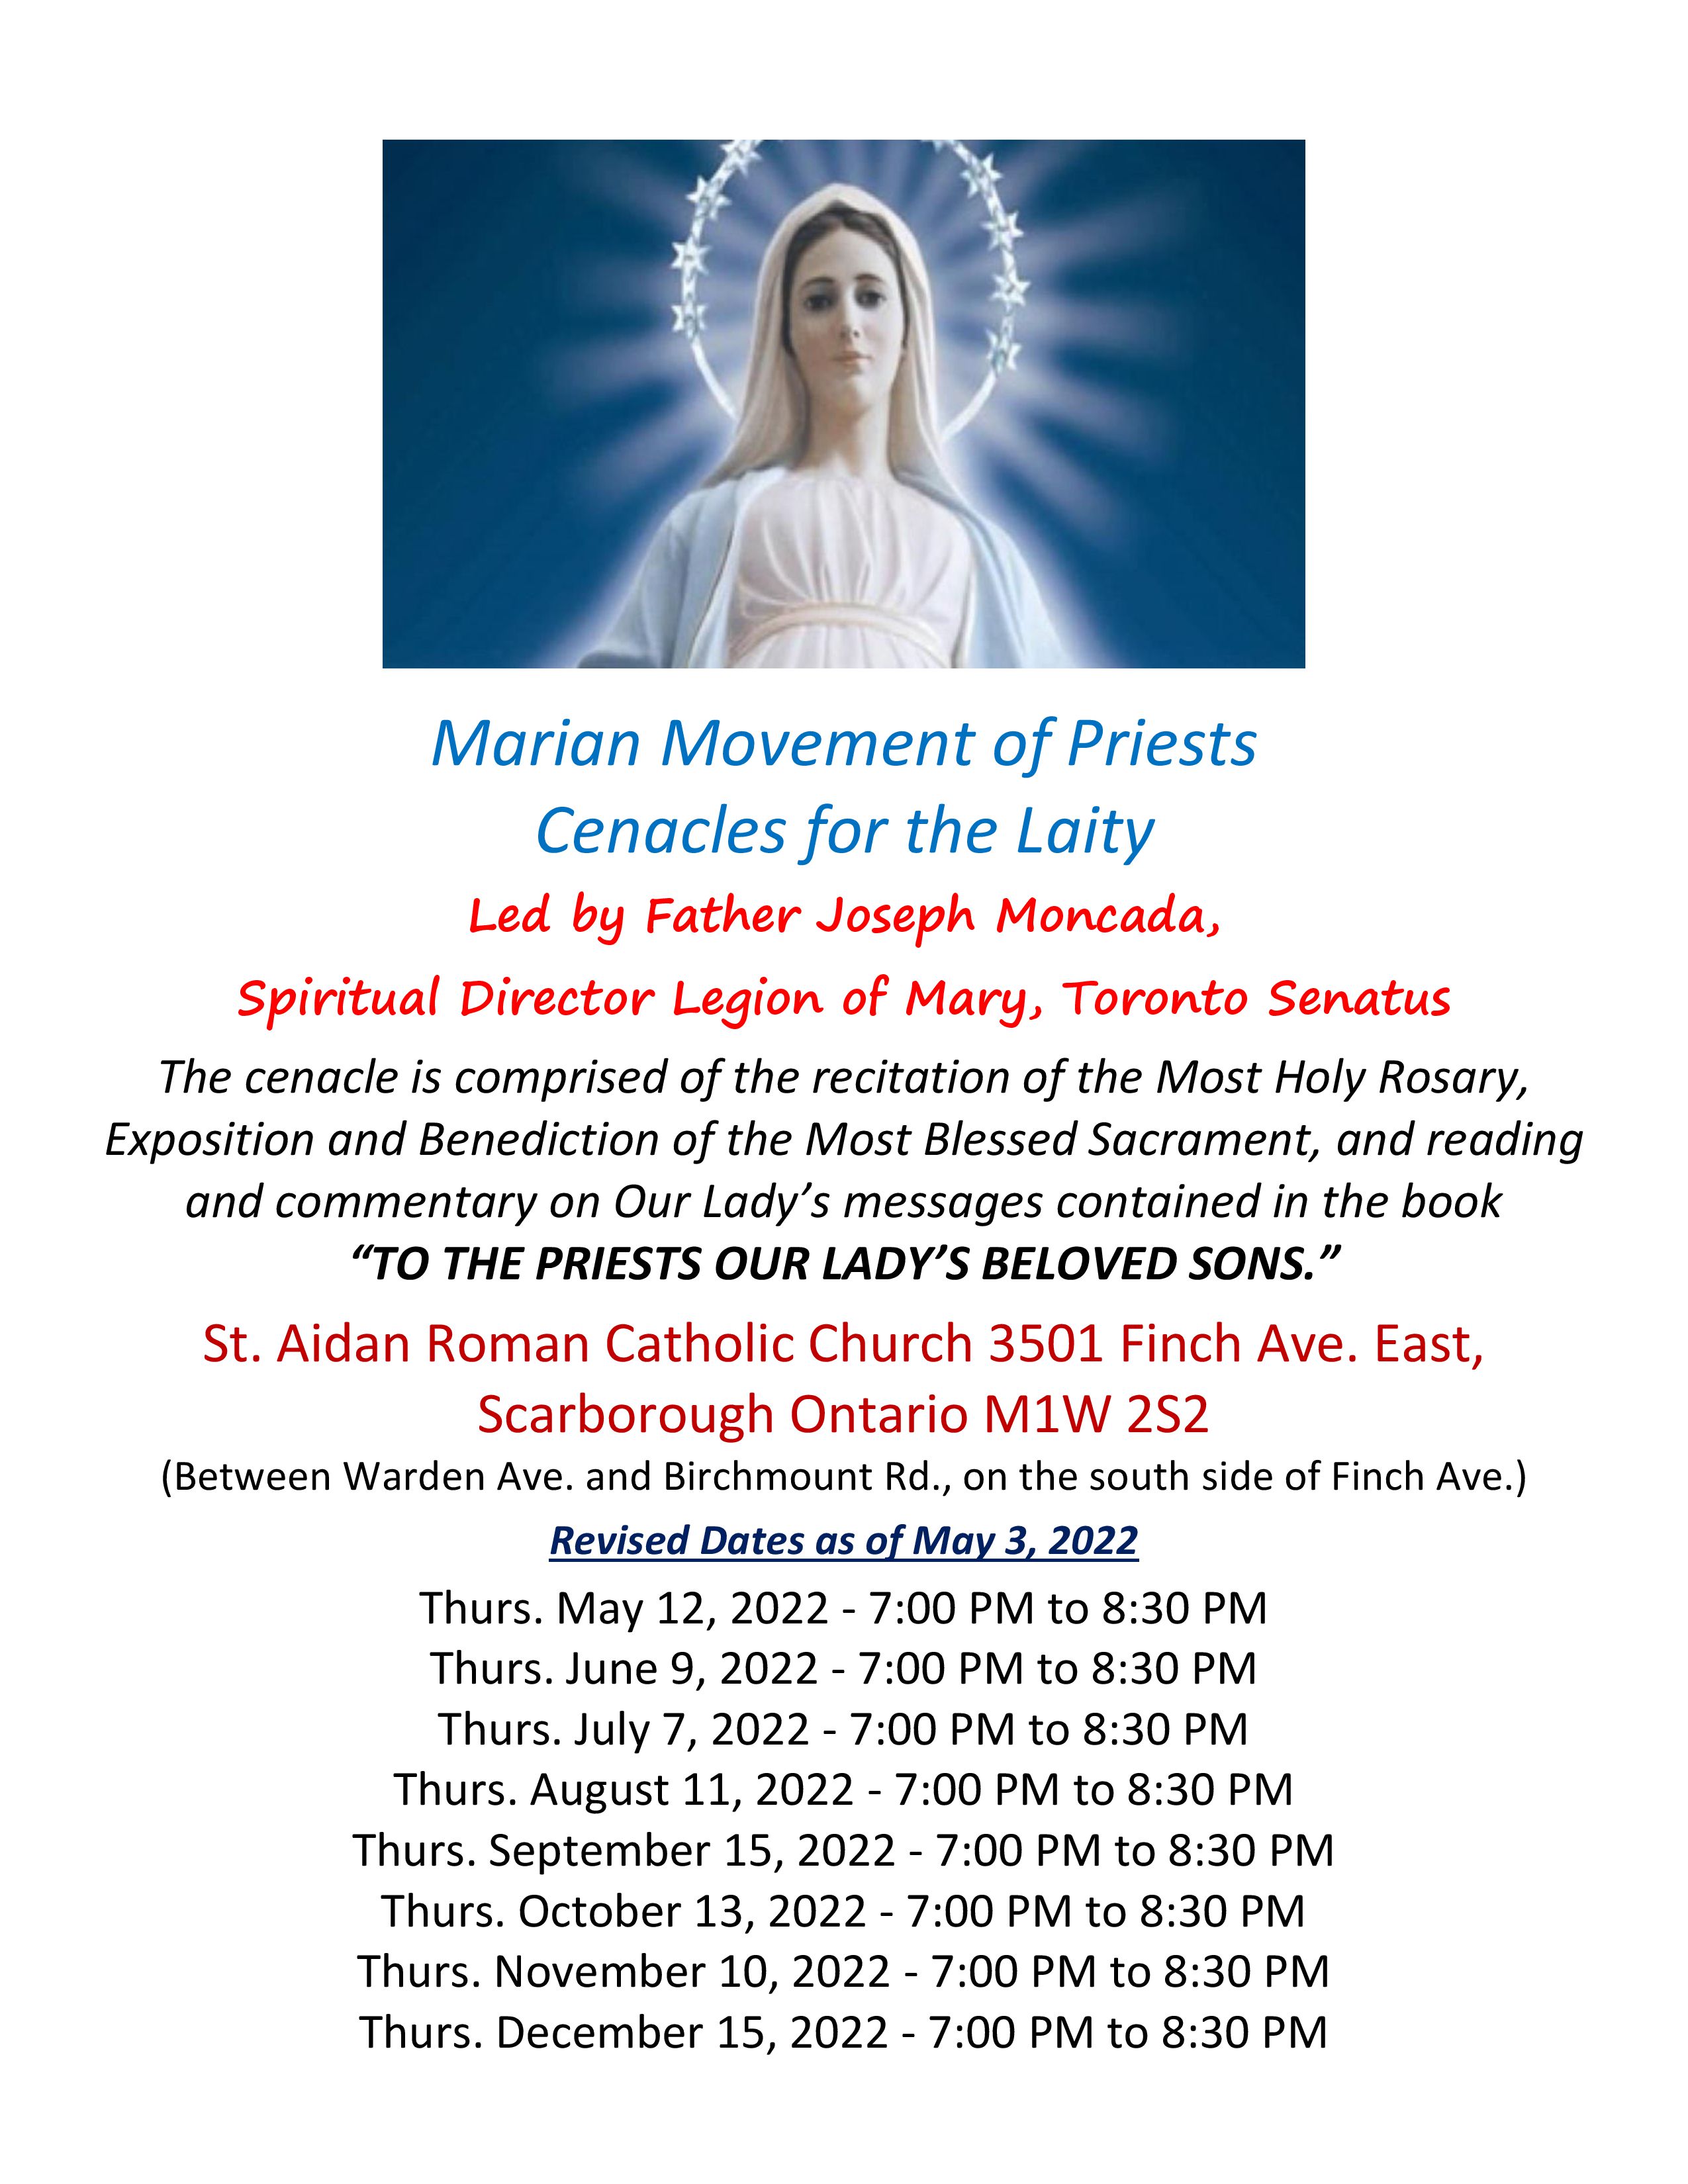 Marian Movement of Priests for the Laity revised May 24, 2022